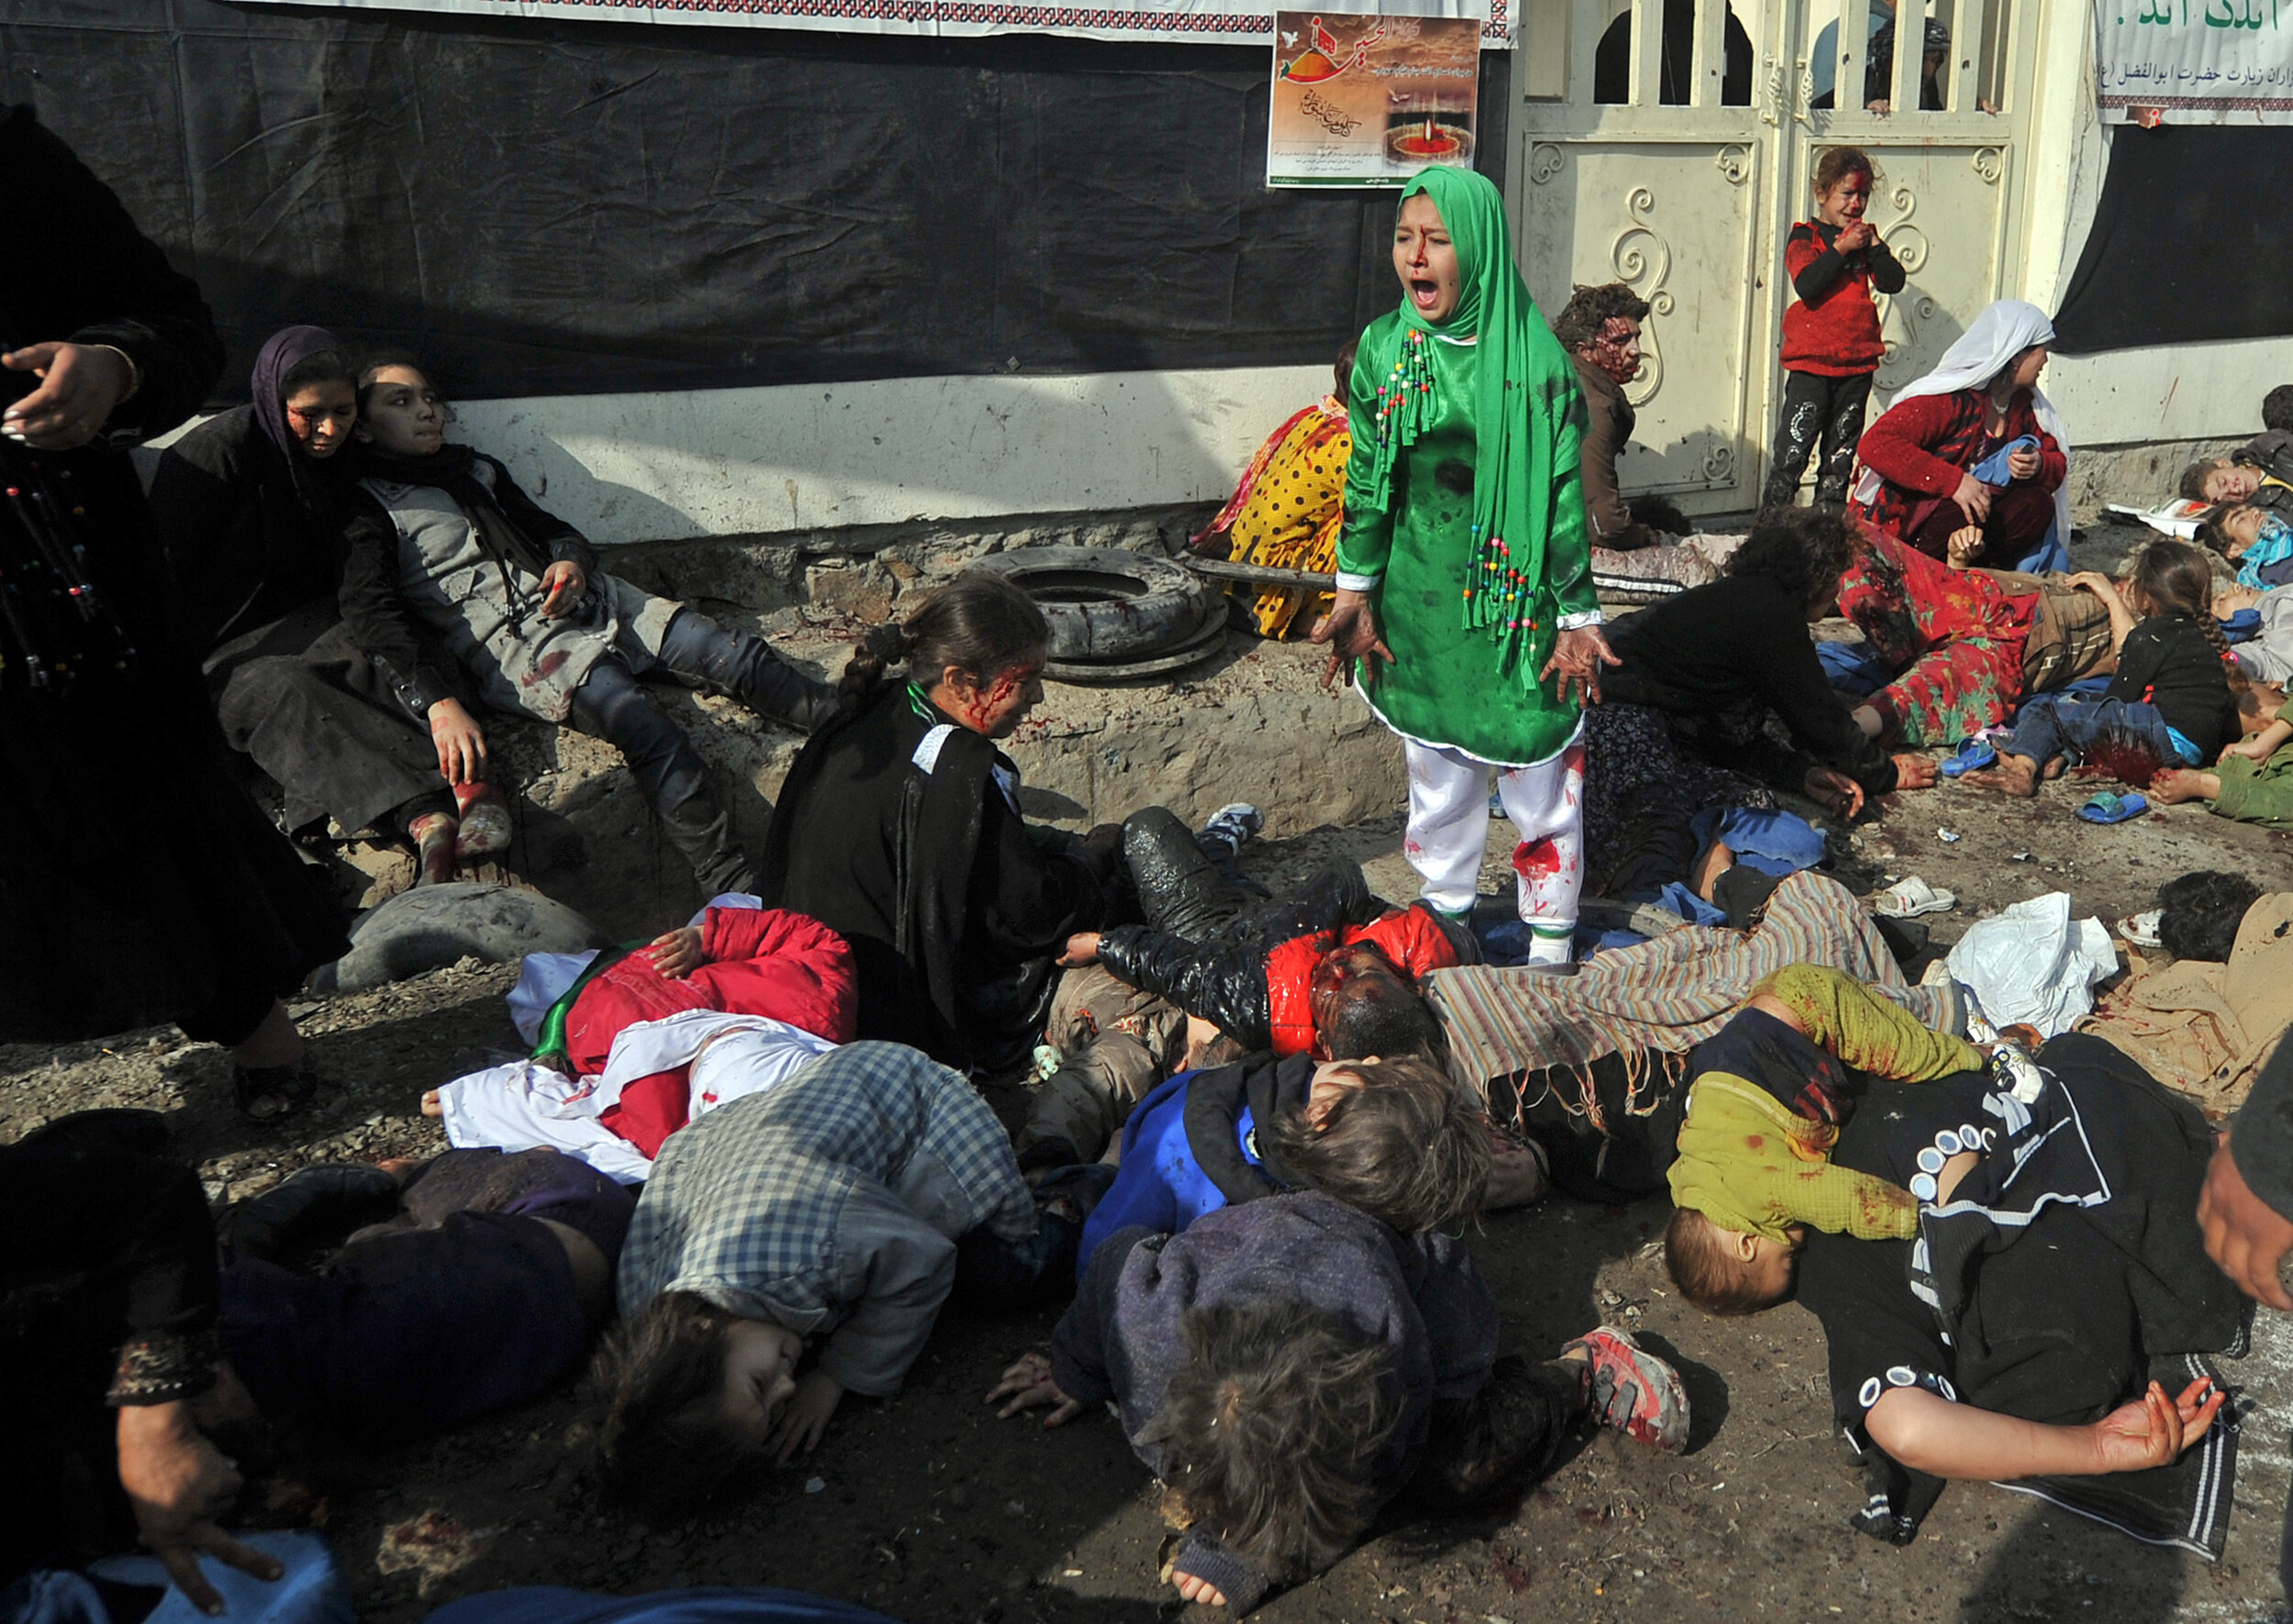  Tarana Akbari, 12, screams in fear moments after a suicide bomber detonated a bomb in a crowd at the Abul Fazel Shrine in Kabul on December 06, 2011.  Out of 17 women and children from her family who went to a riverside shrine in Kabul that day to m